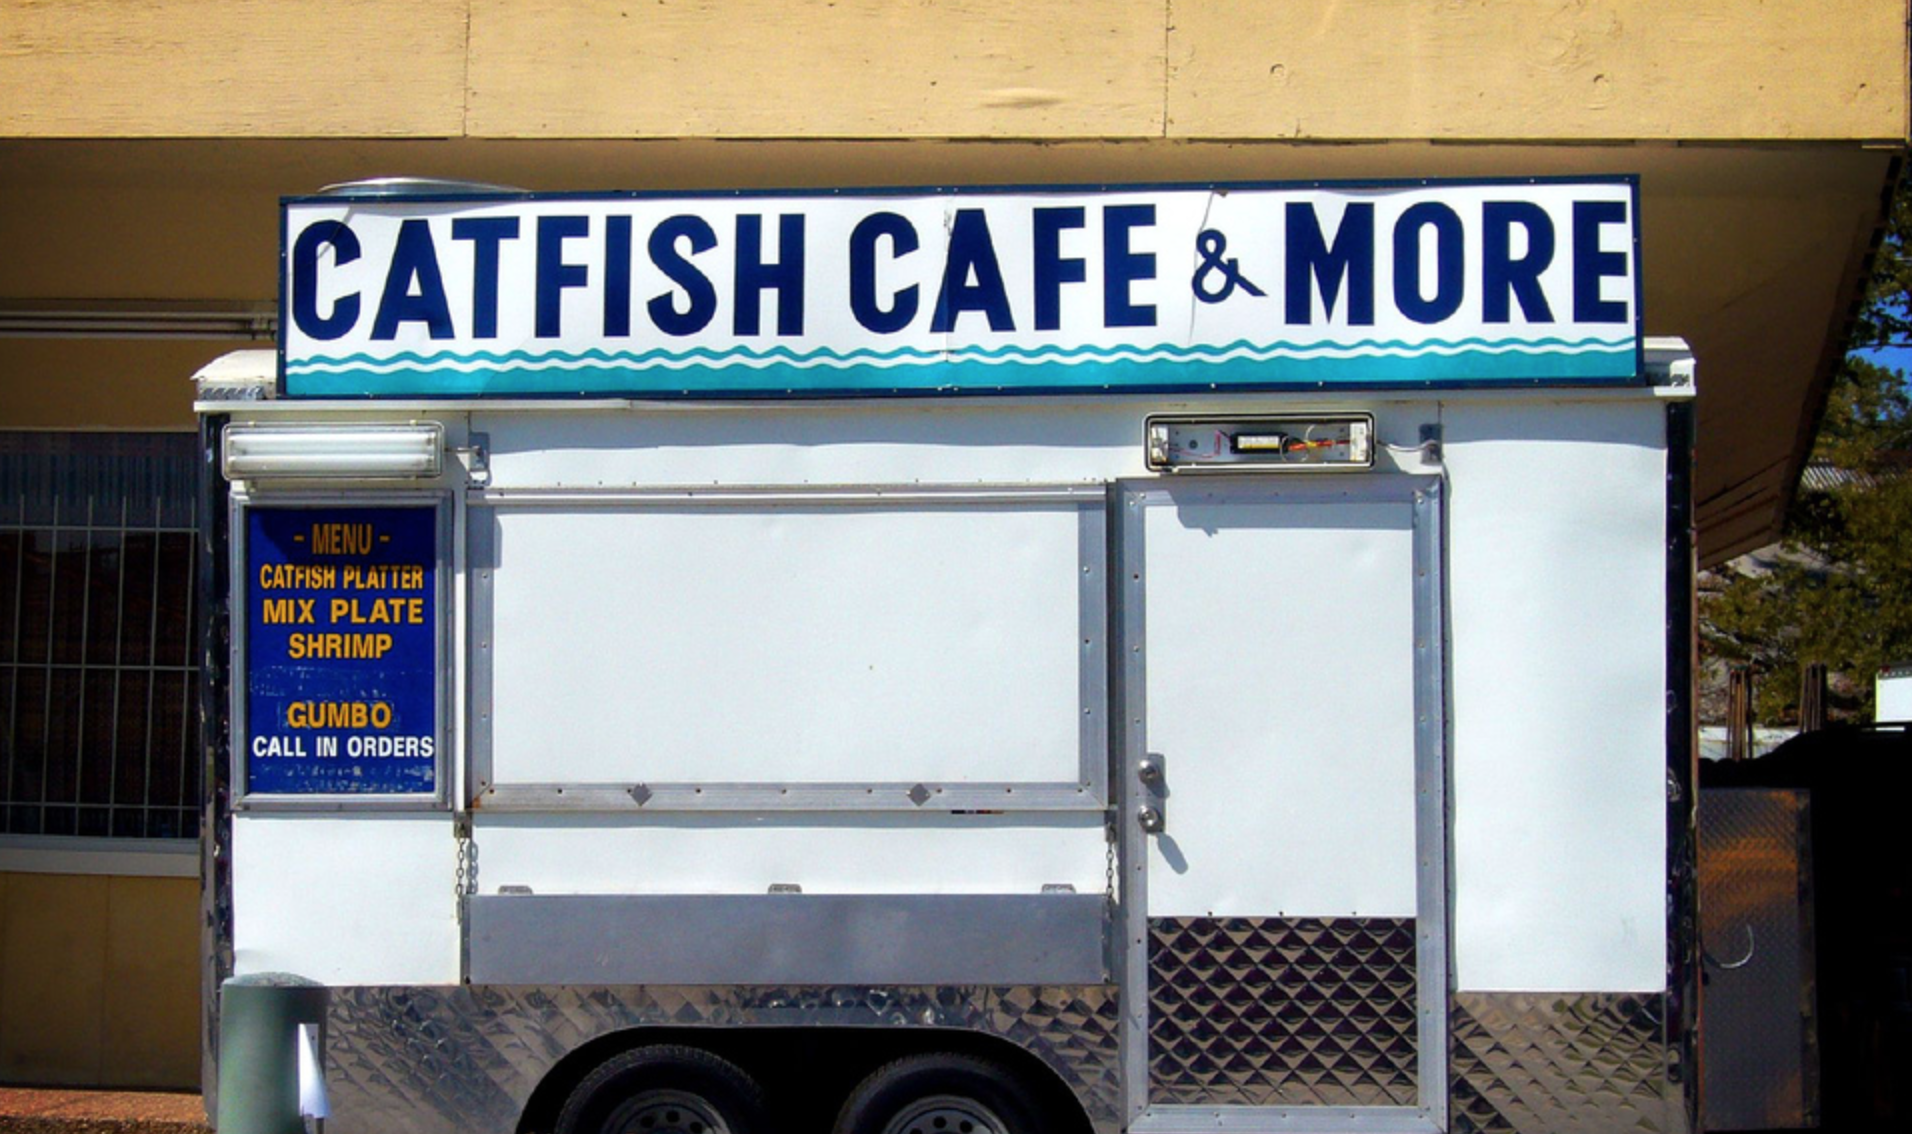 A food truck selling catfish